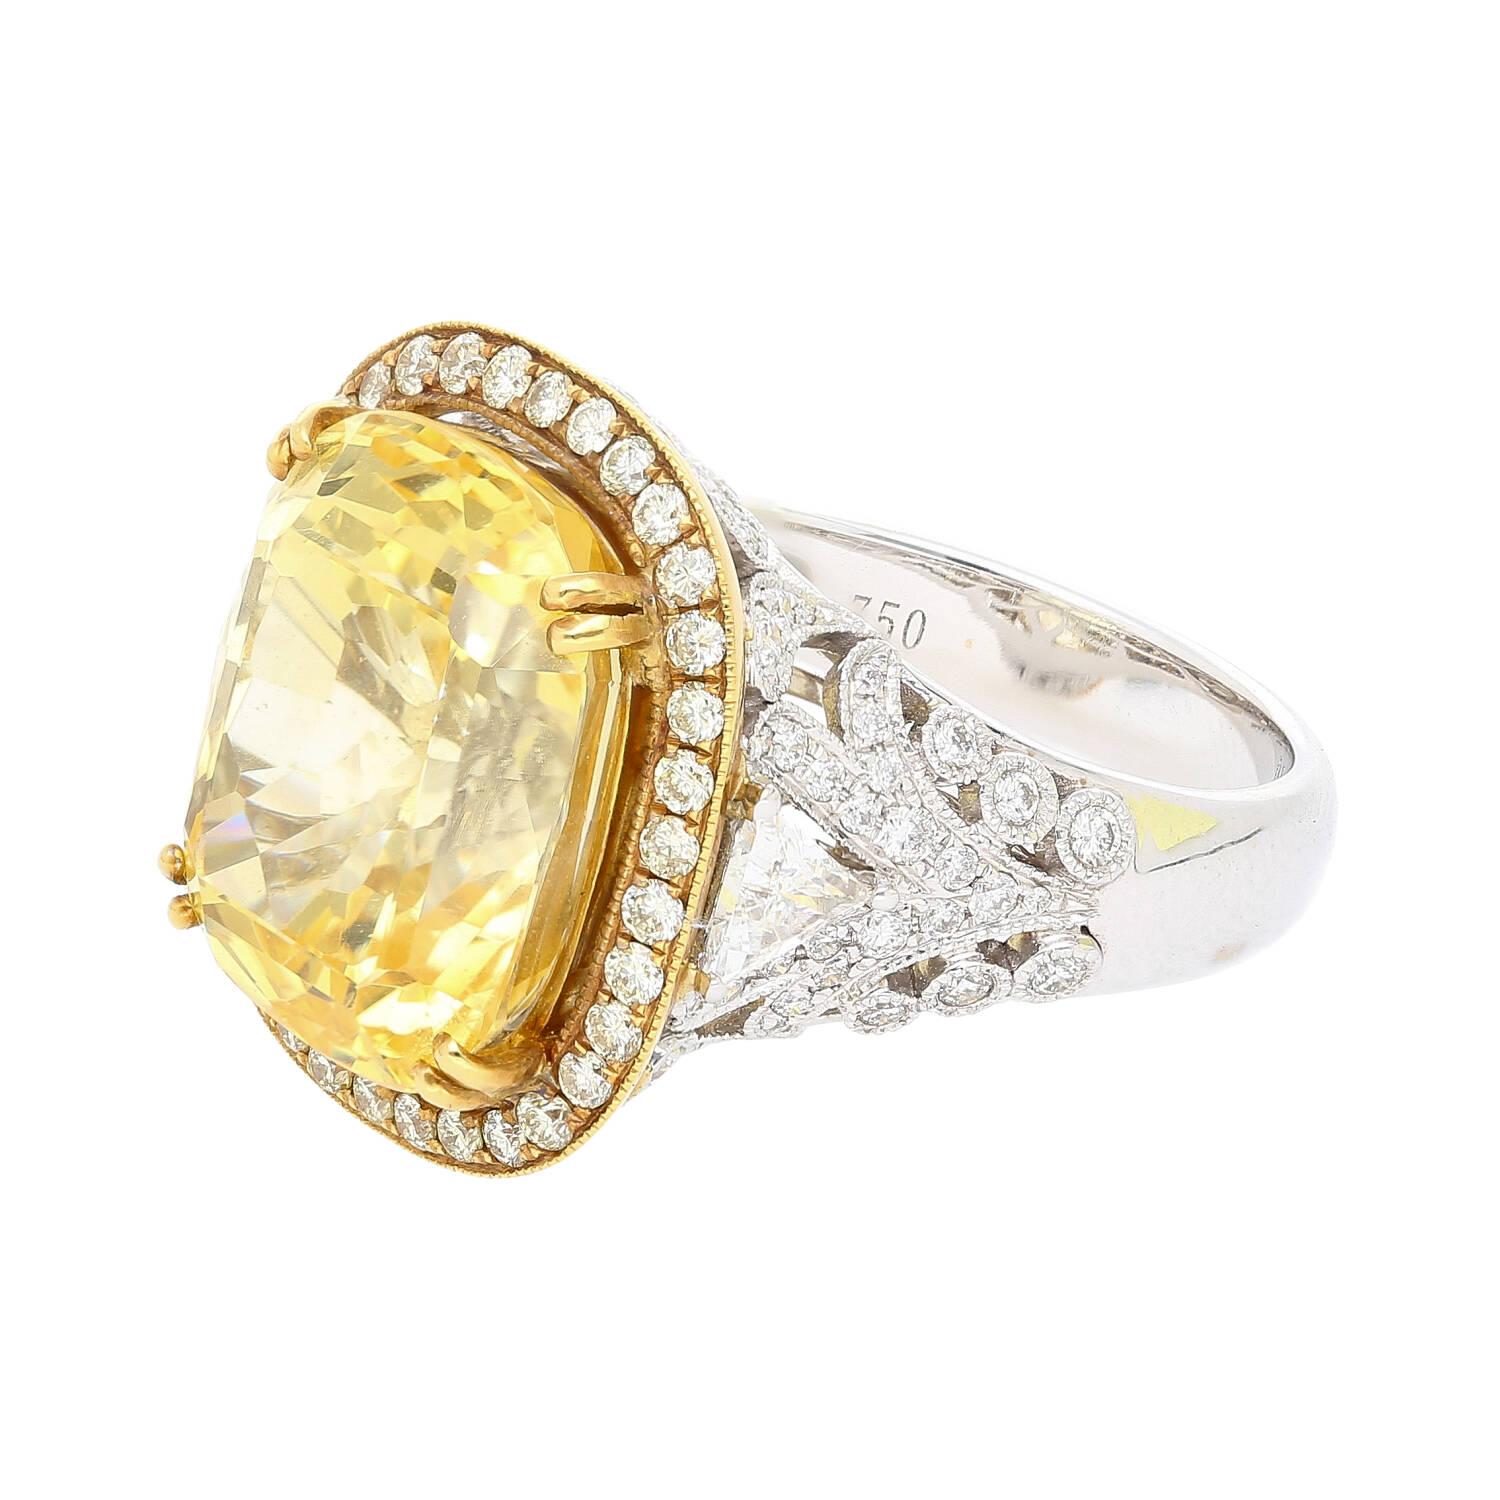 Discover unparalleled elegance with this regal 17-carat cushion cut no-heat yellow sapphire and trillion cut diamond 18k white gold ring. A true masterpiece.

The GIA-certified sapphire captivates with its vivid yellow color and brilliance, a